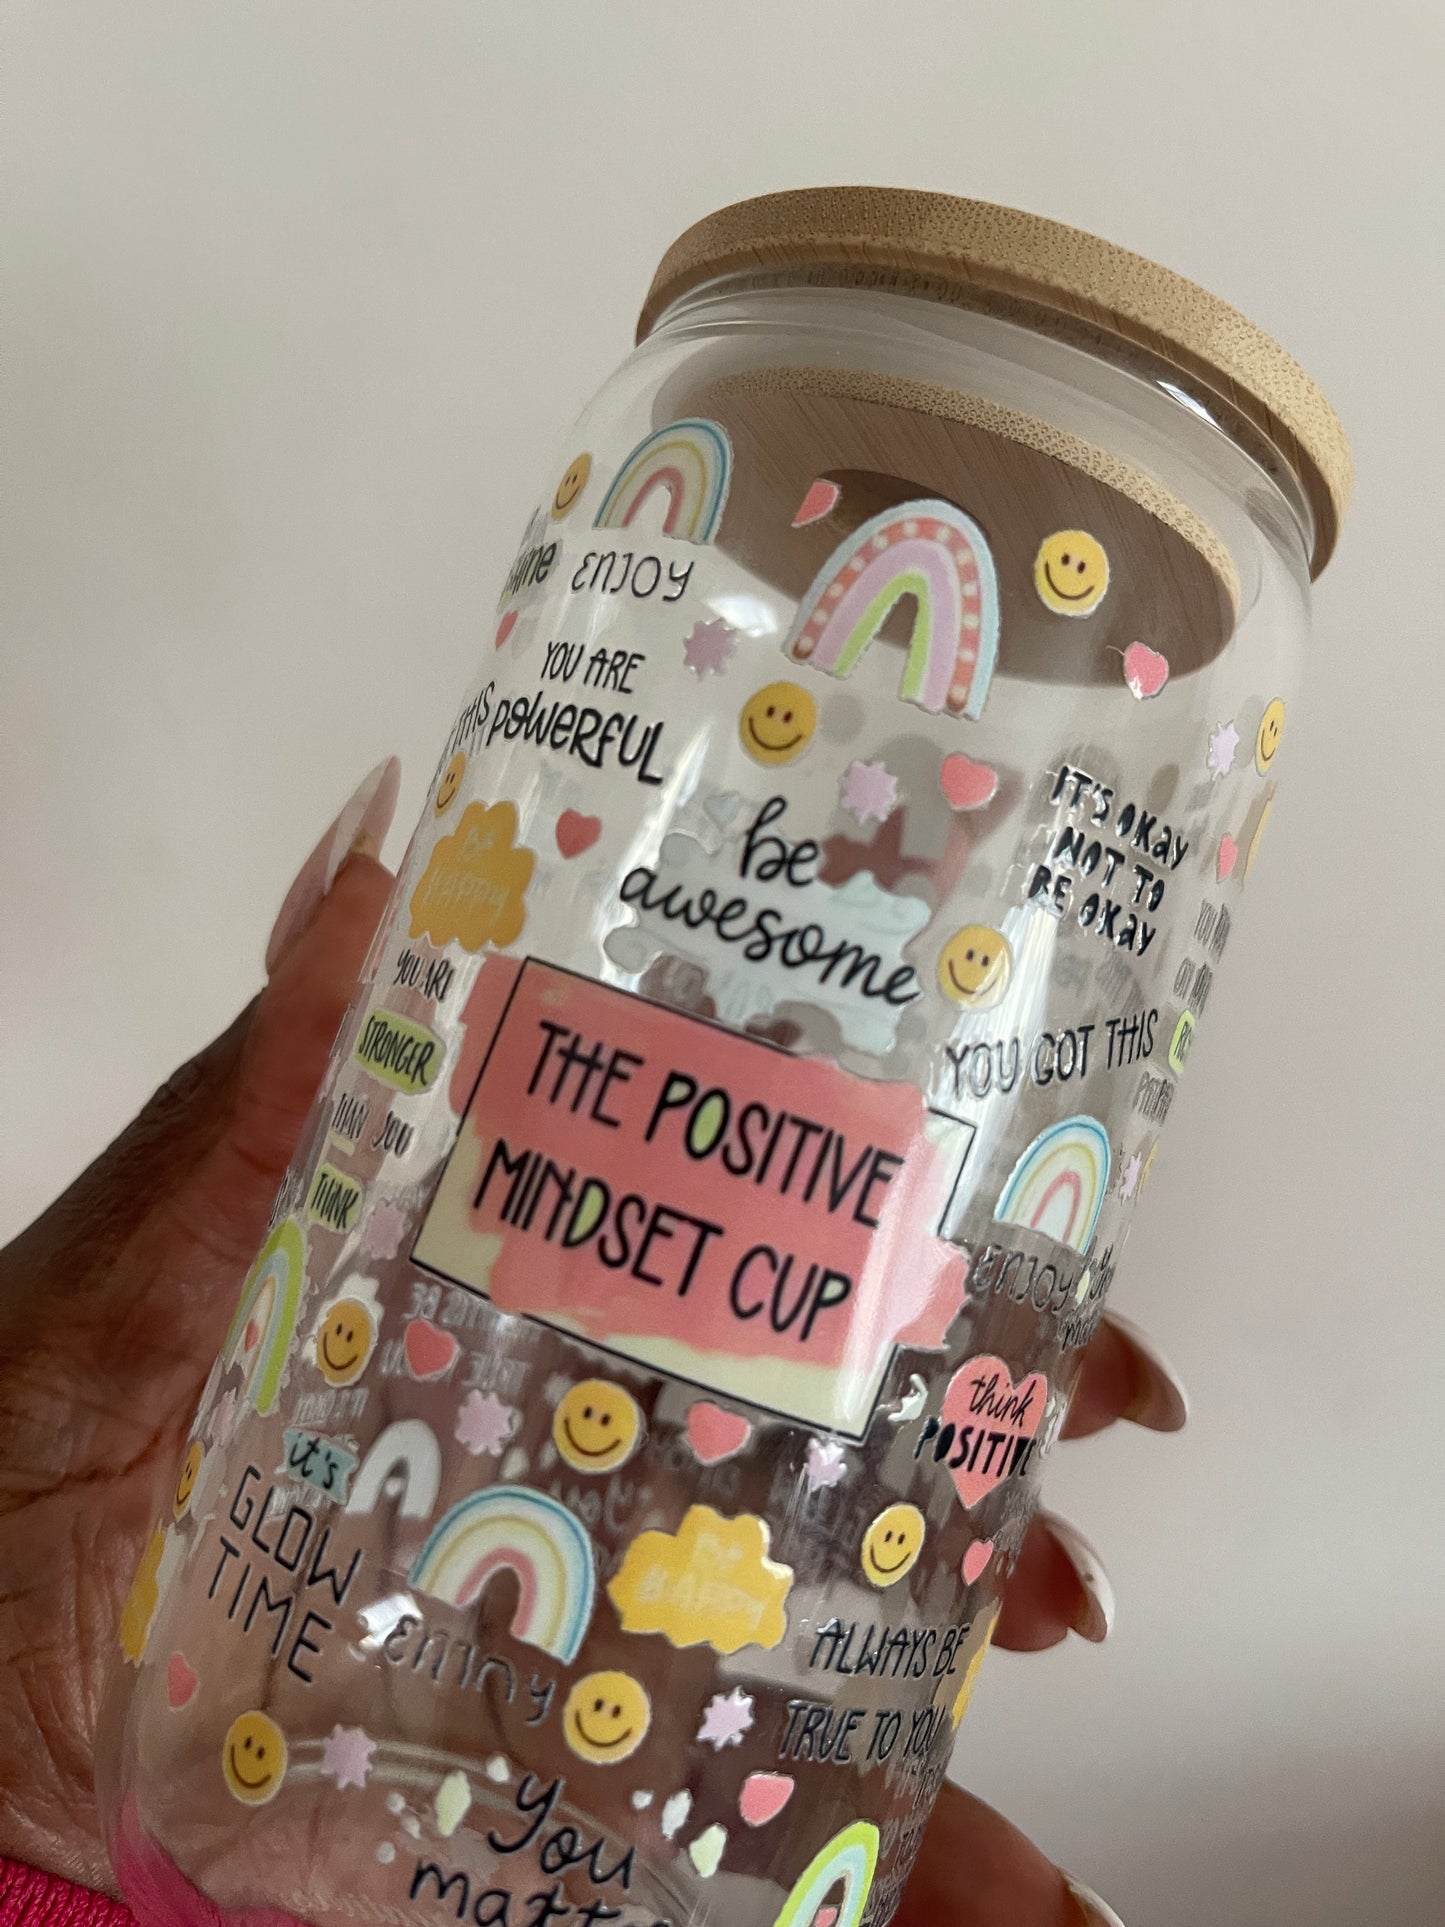 The Positive Mindset Glass Cup